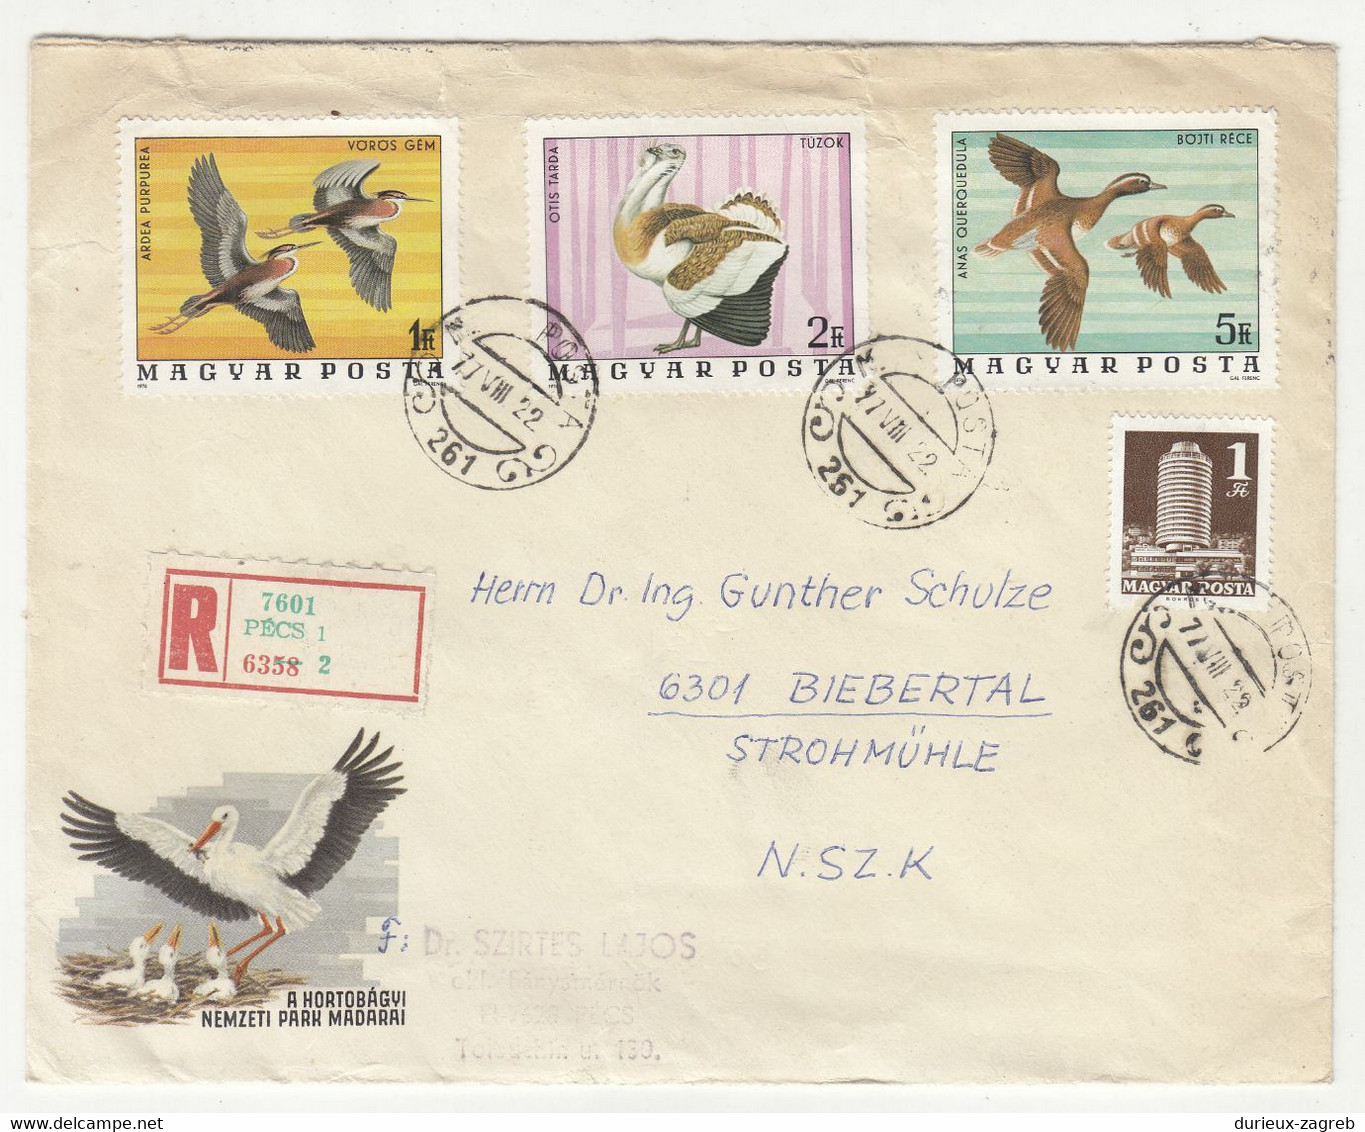 Hungary Letter Cover Posted Registered 1977 Pecs - Birds On Stamps B220901 - Covers & Documents